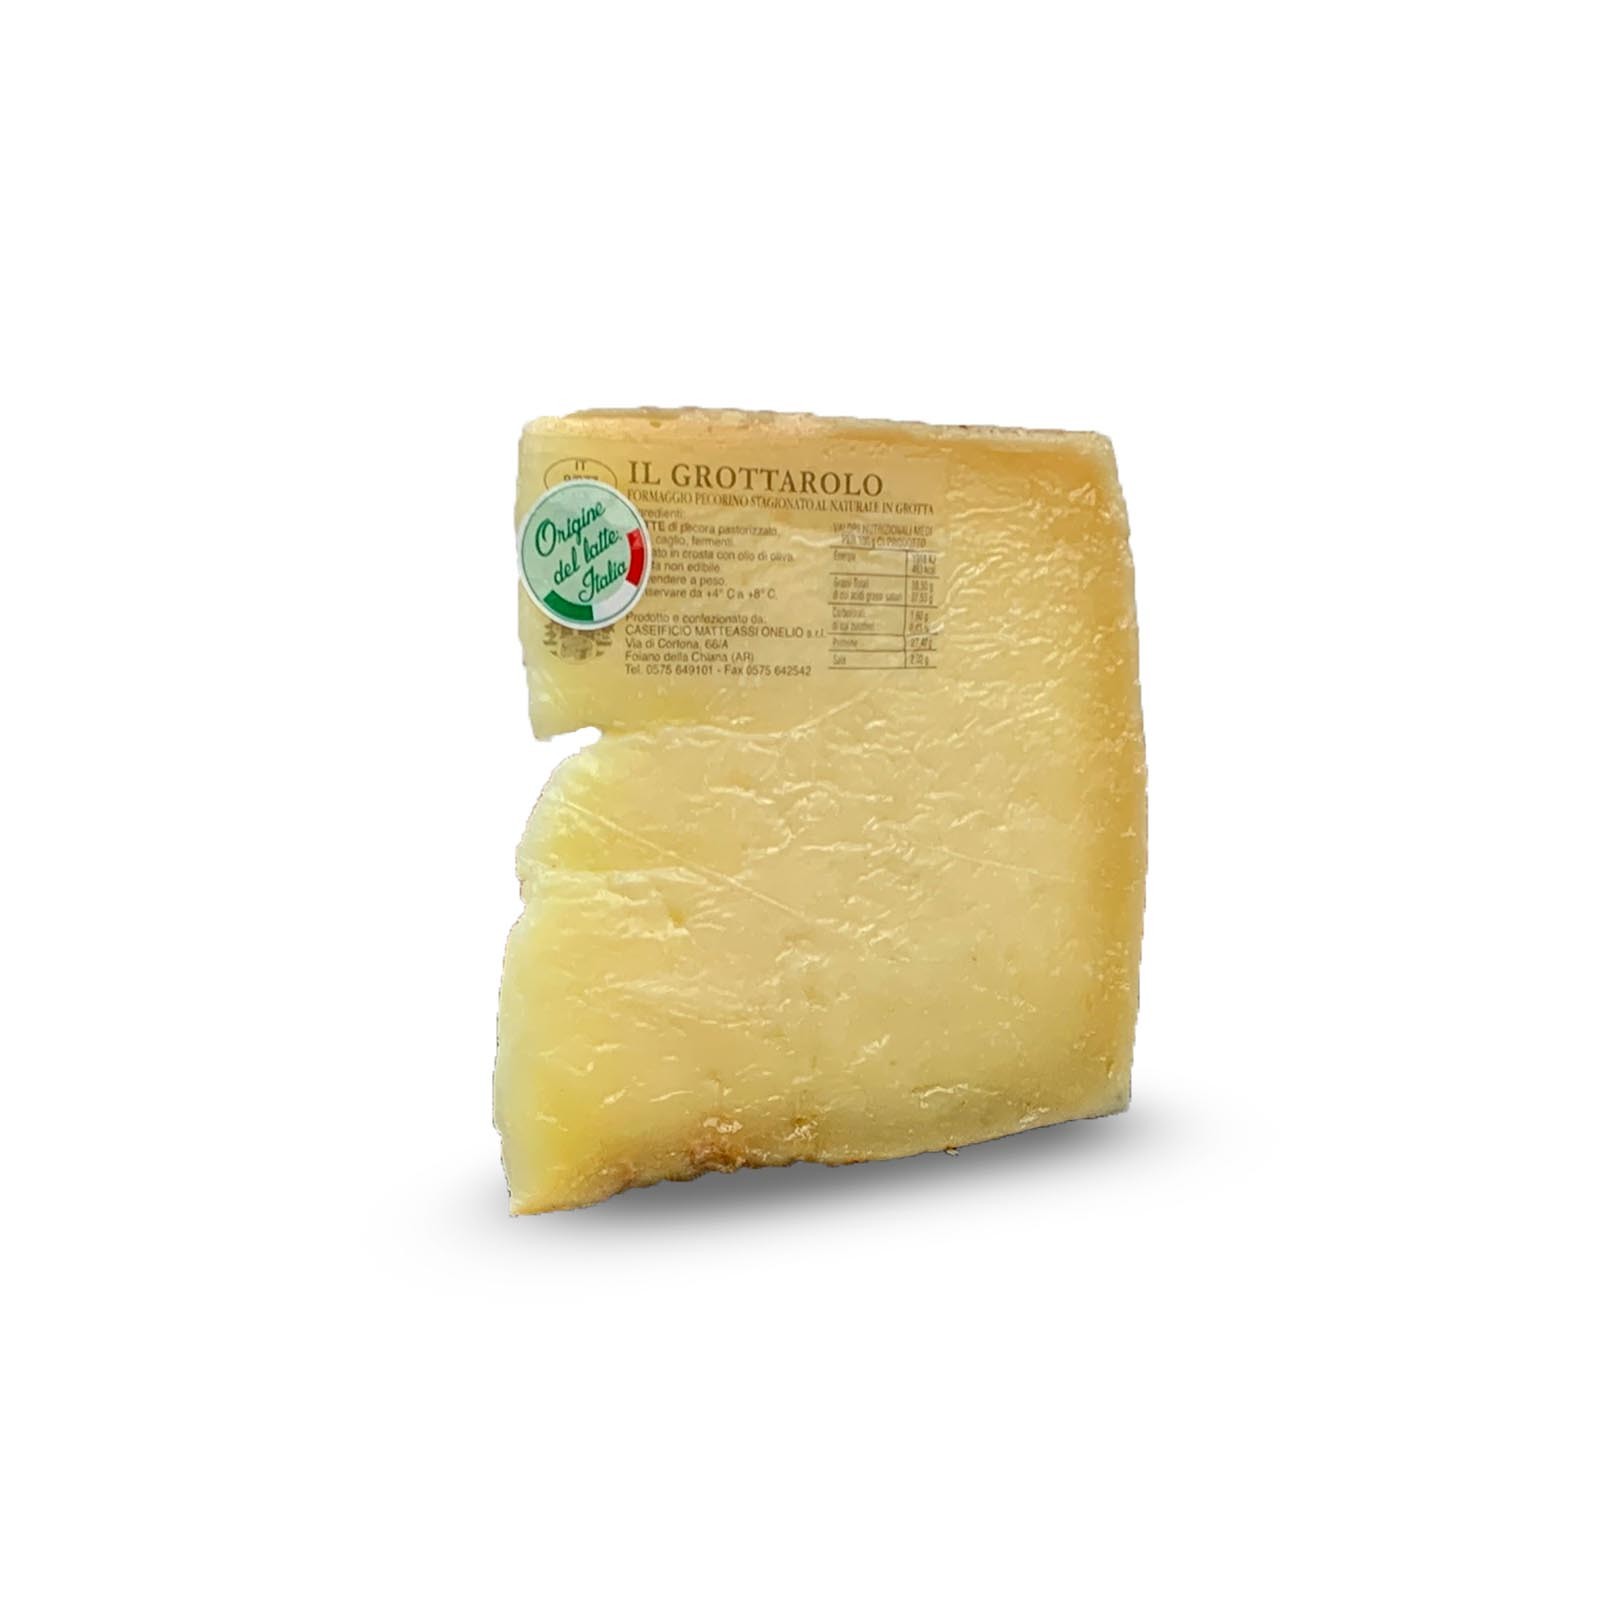 “Il Grottarolo” Aged Tuscan Pecorino Cheese owes its name to the place of maturation where the cheese takes on its characteristic aroma and flavor that makes it fully part of the great family of Tuscan pecorino cheeses so loved both in Italy and abroad. Its production area is precisely the Valdichiana and its most important peculiarity for obtaining an excellent final result, in addition, of course, to the high quality of the raw material, is the aging in caves.